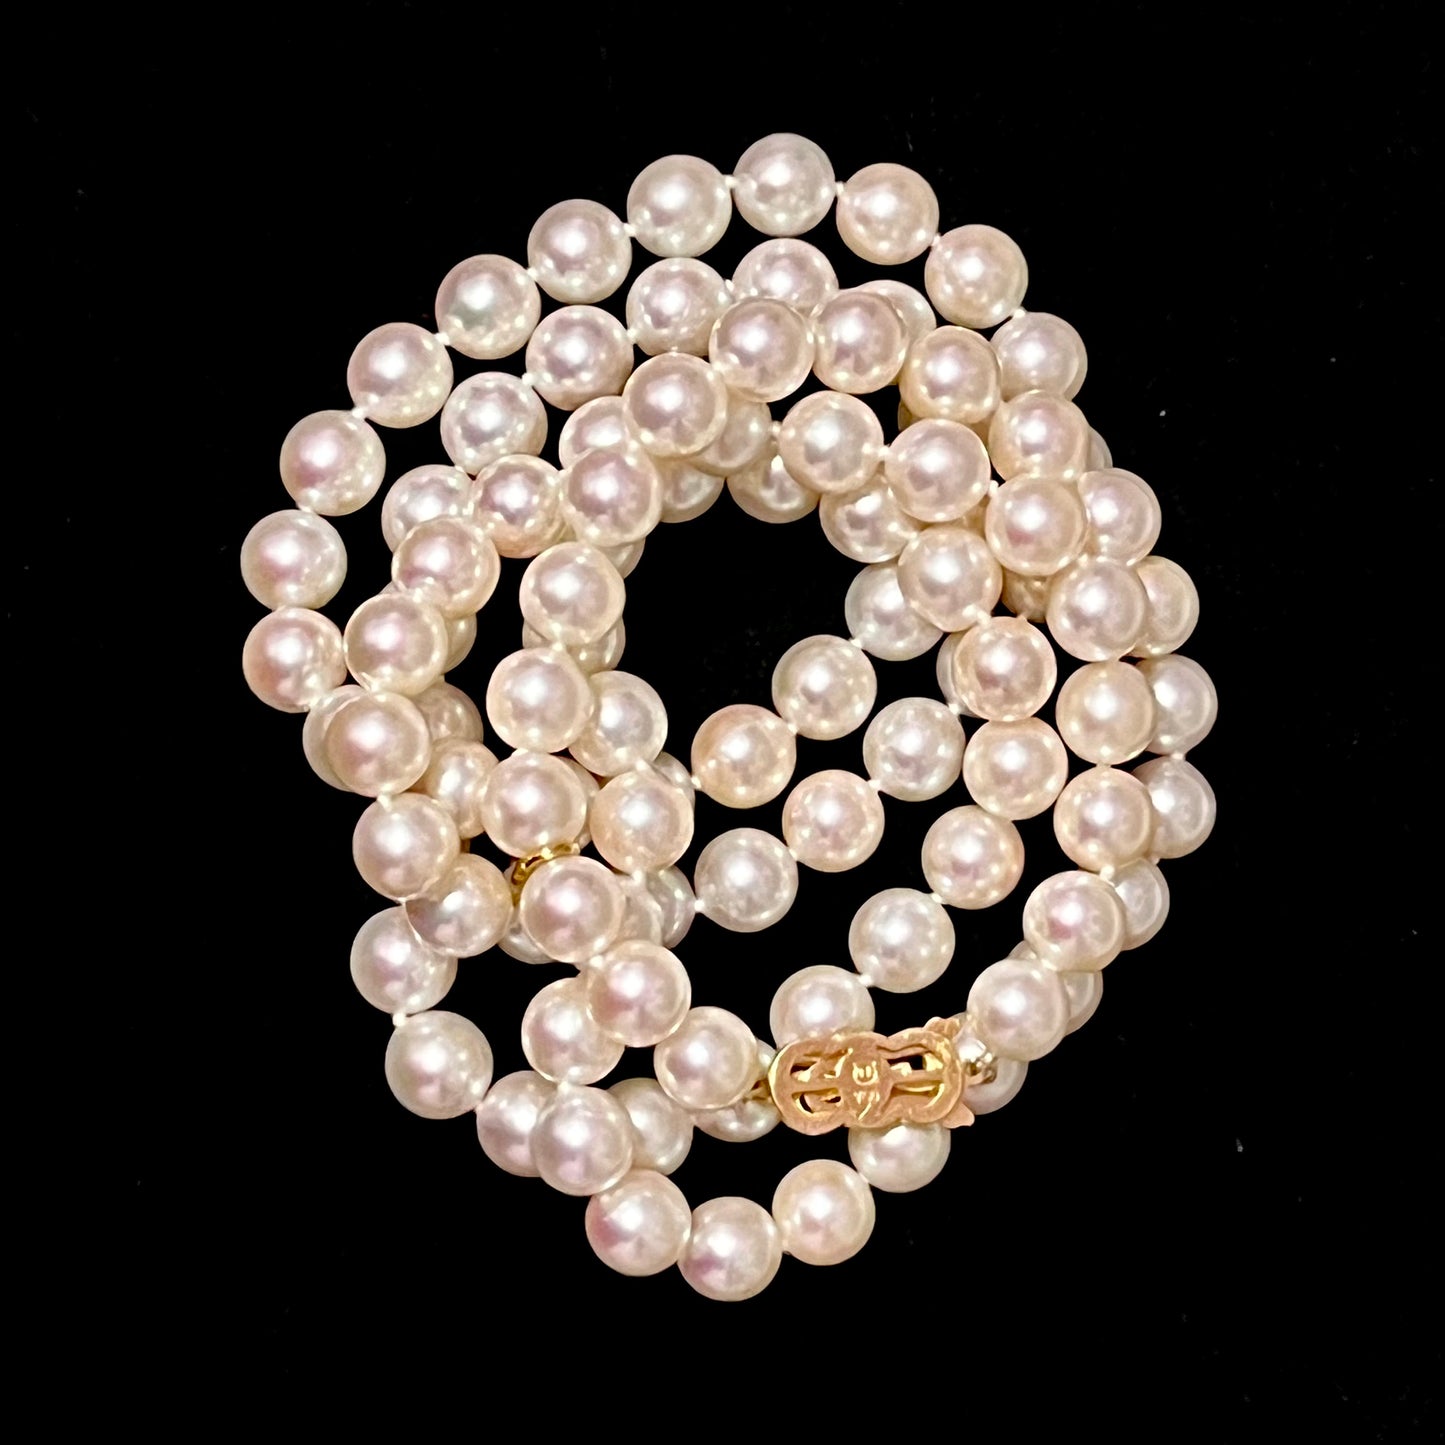 Mikimoto Estate Akoya Pearl Necklace 36" 18k Y Gold 9 mm Certified $56,000 M56000